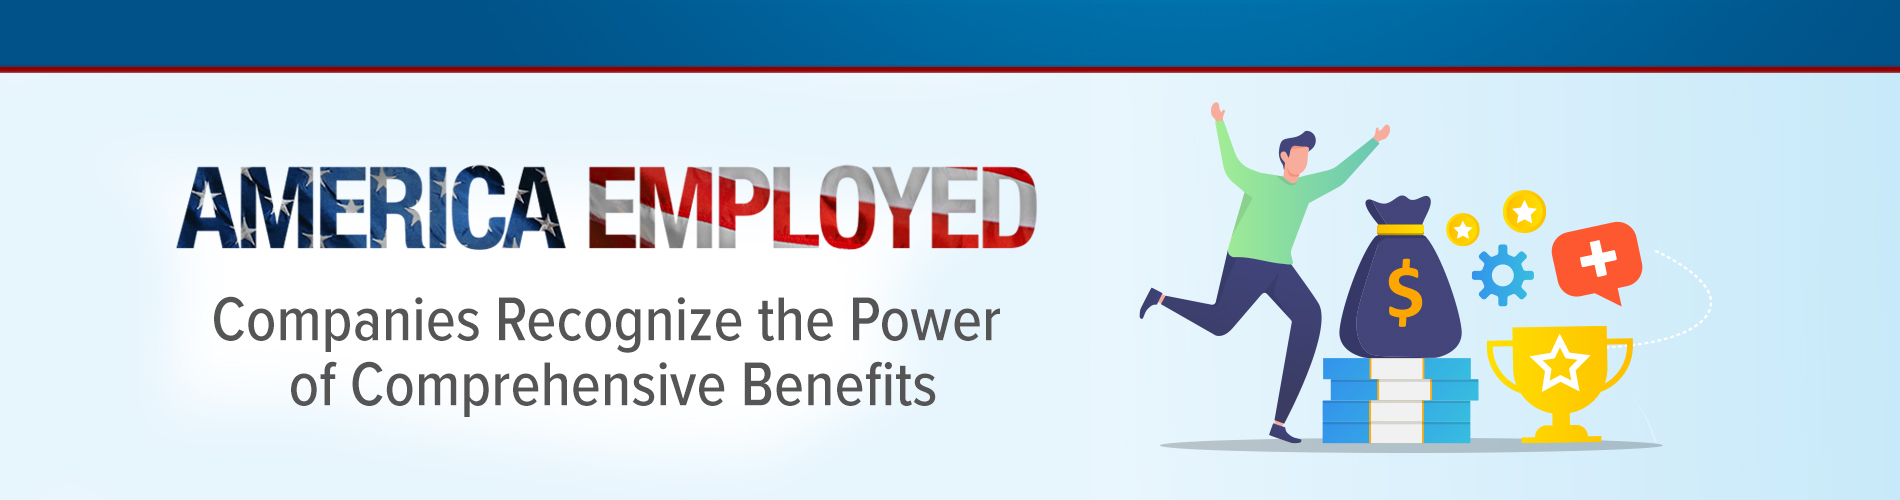 4-10-24 Benefits for Retention - America Employed